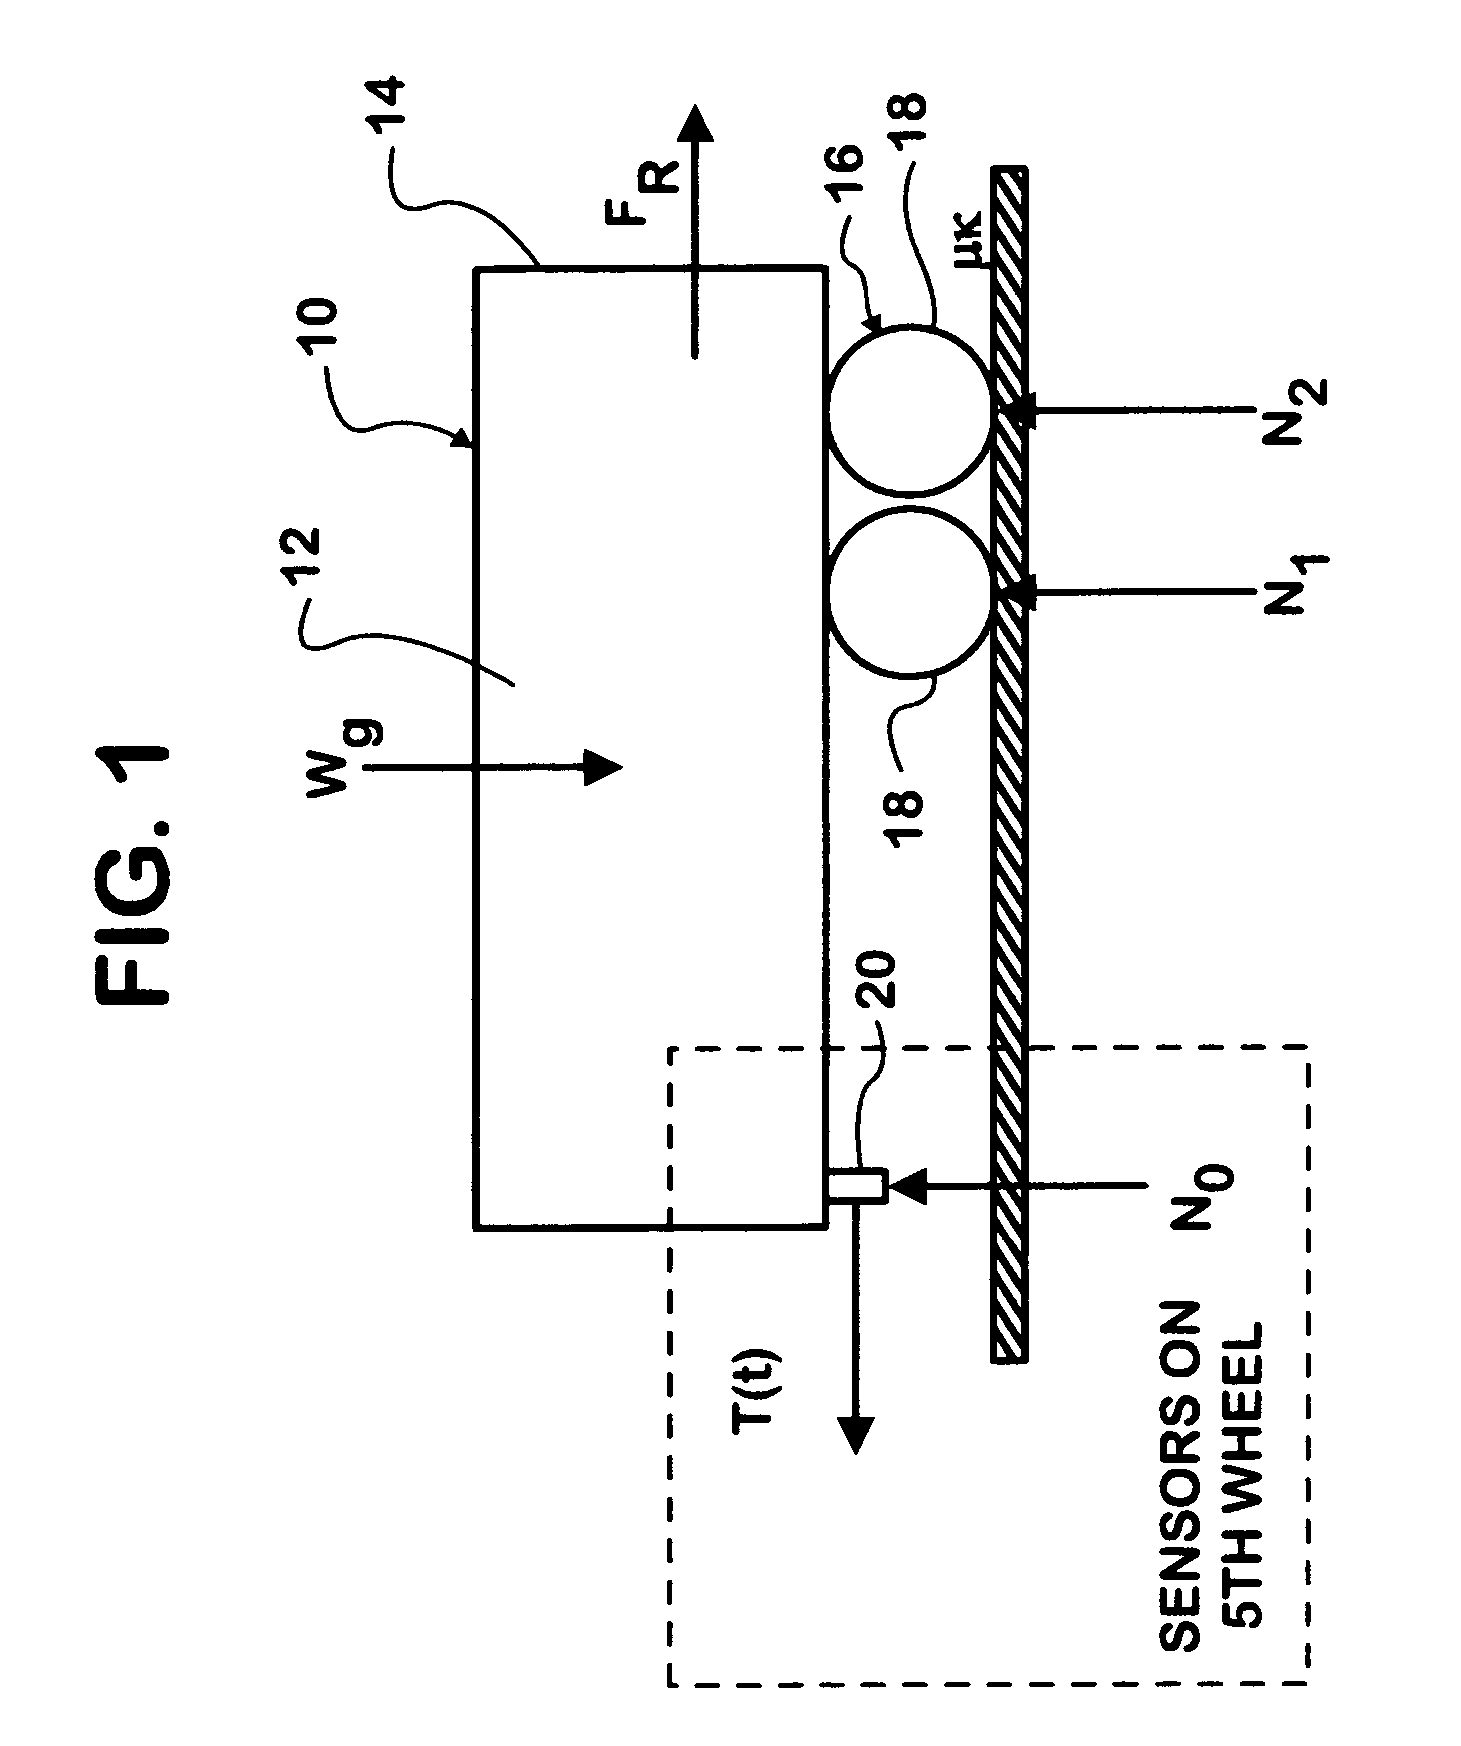 Tractor-trailer having self-contained apparatus on-board tractor for estimating trailer weight